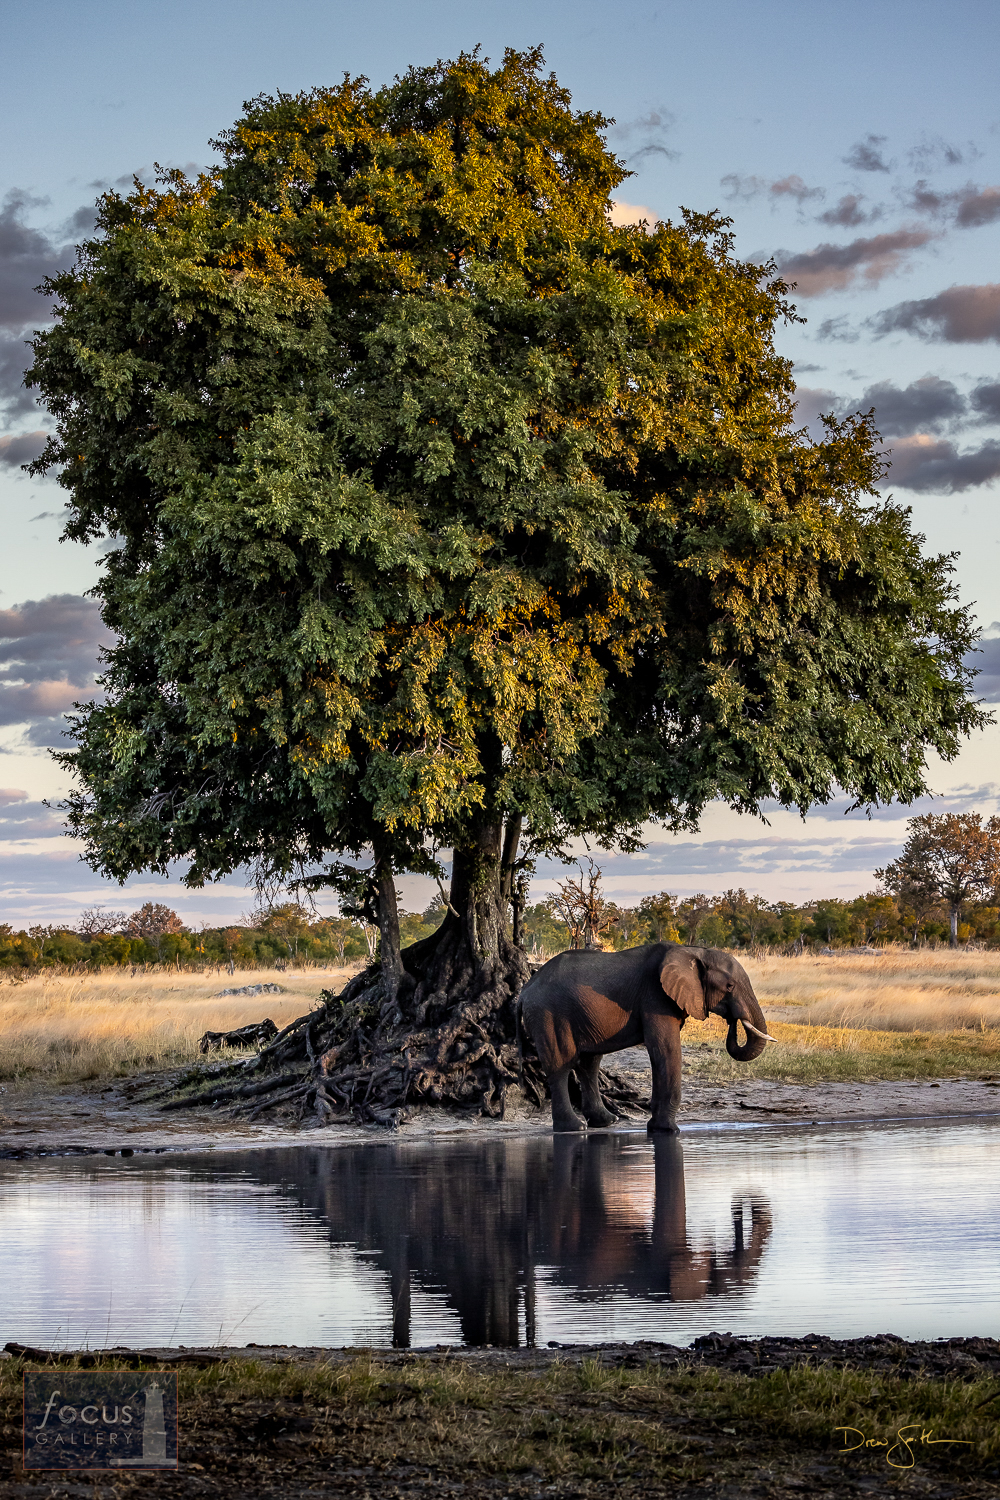 An African elephant drinks from a pan (waterhole) beneath a grand old Ebony tree at dusk.  This is among my favorite images from...